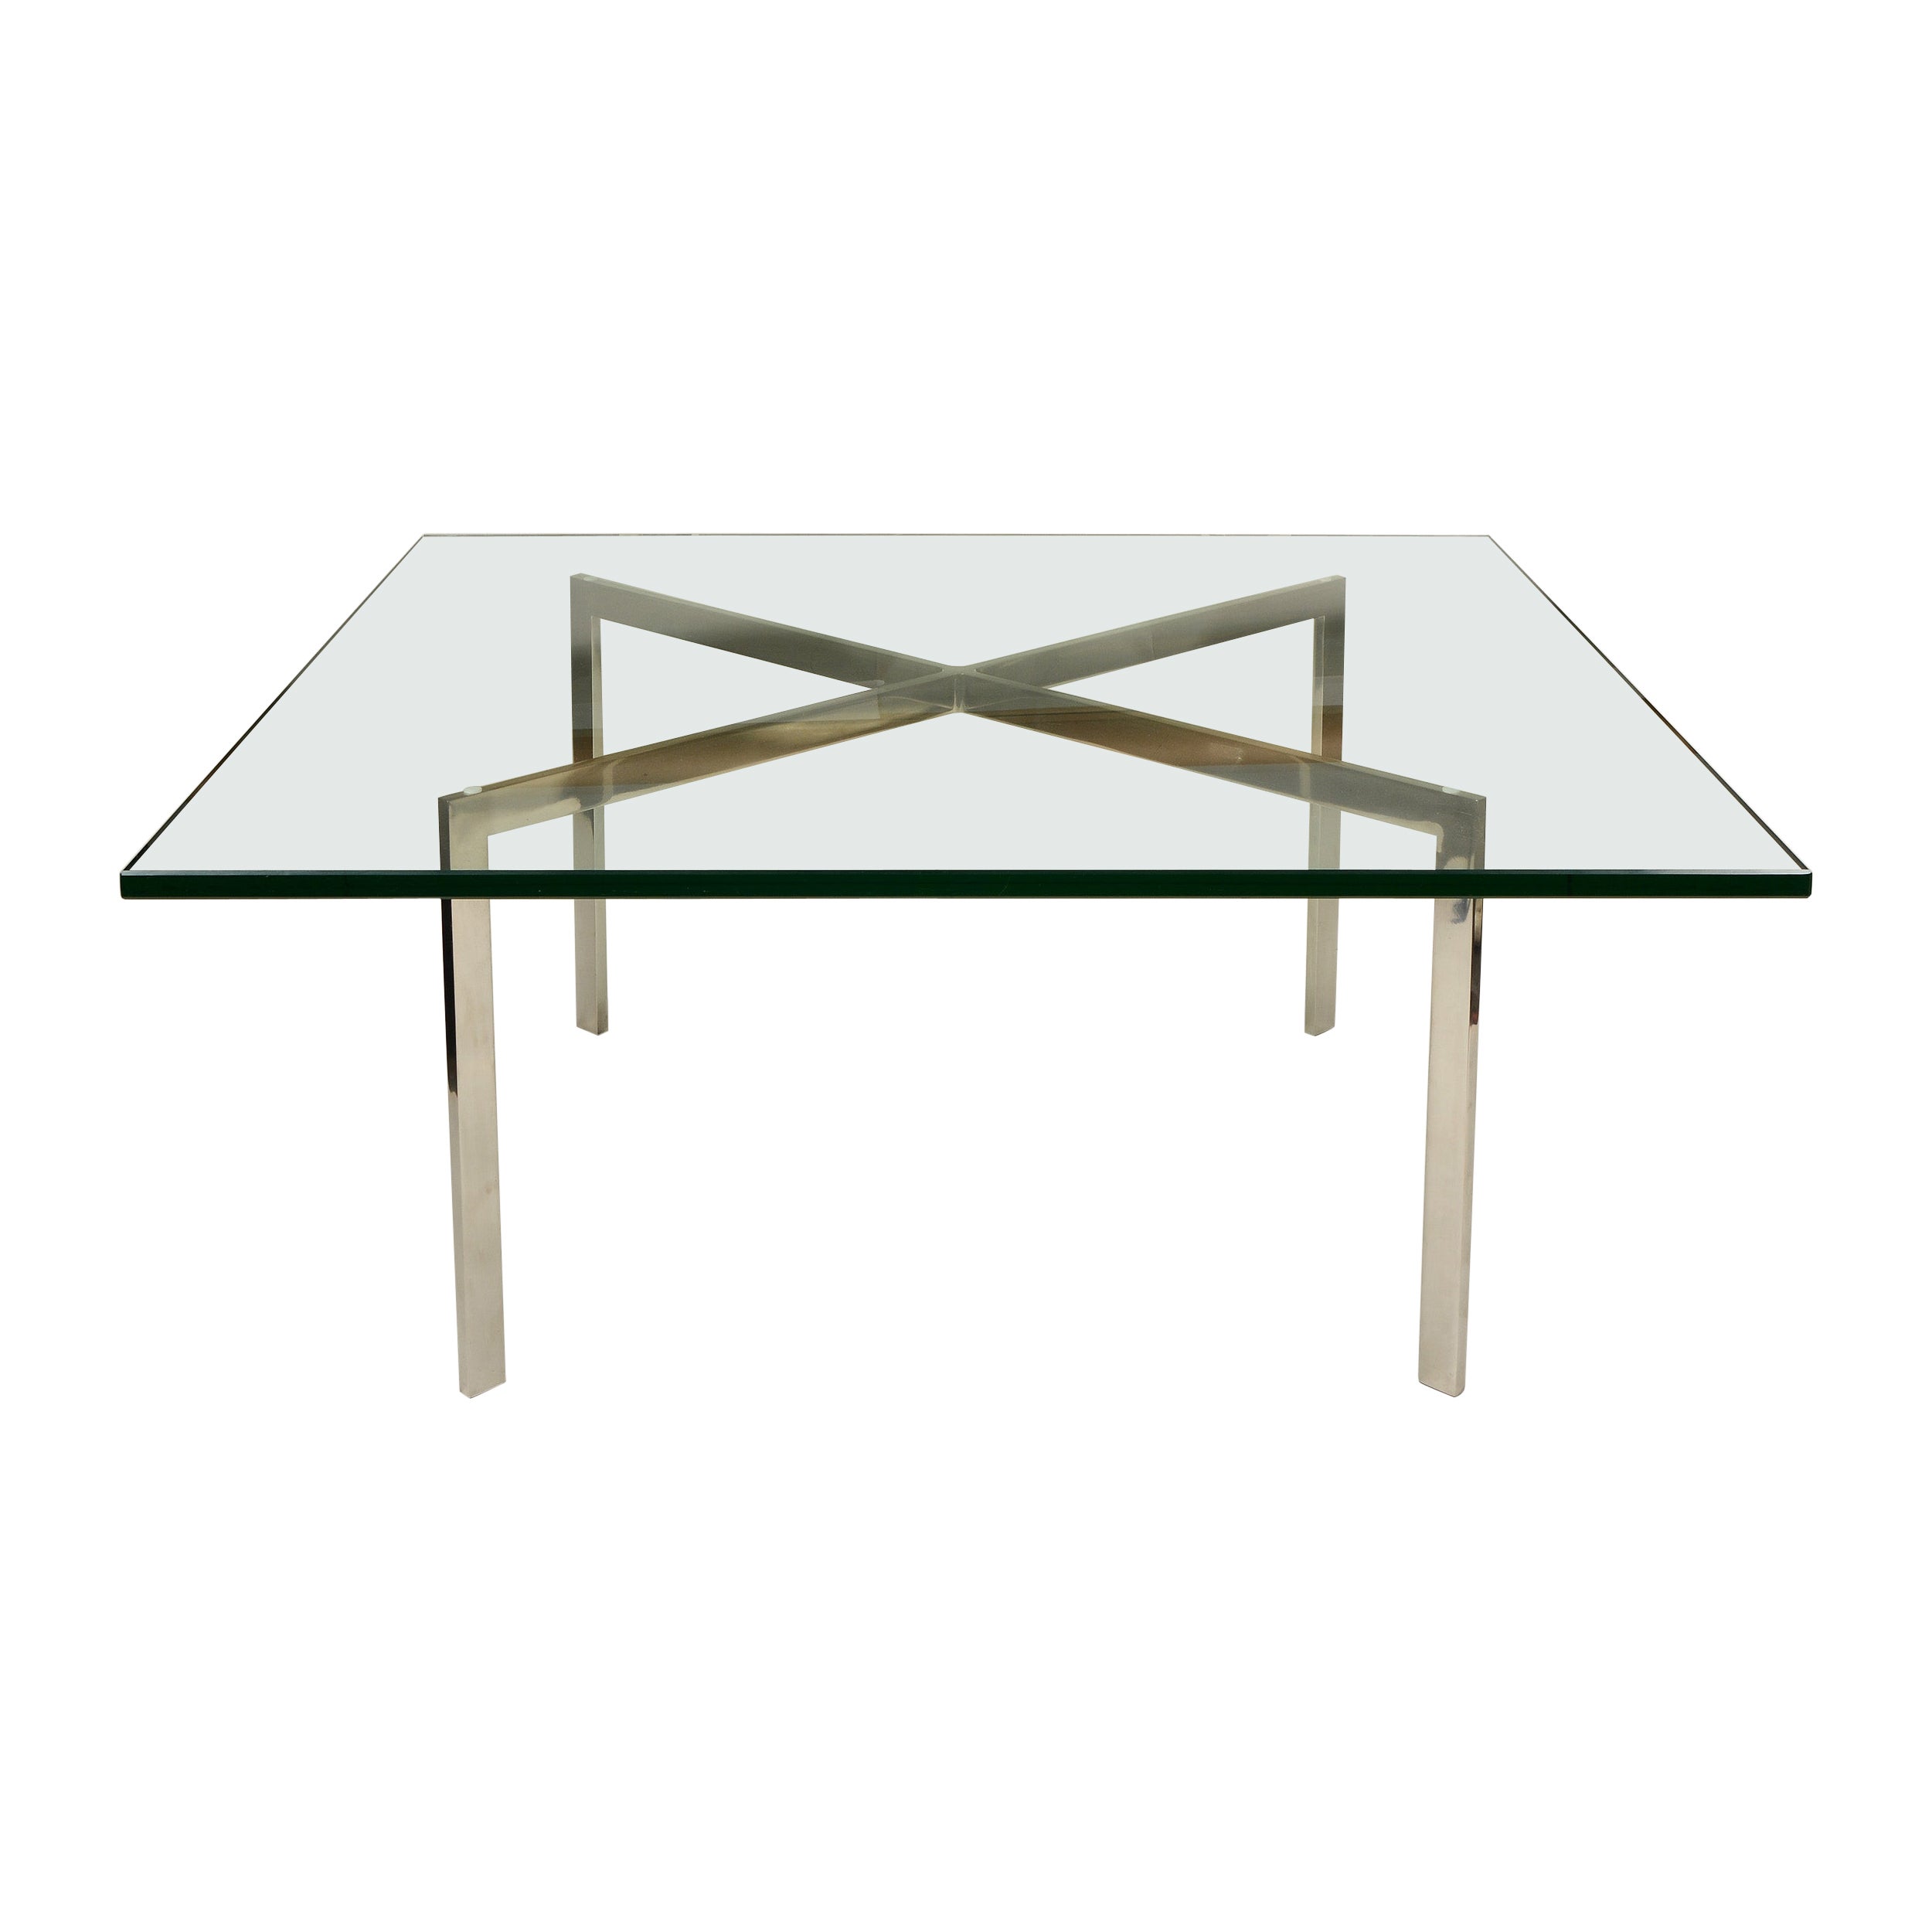 Barcelona Table with Stainless Steel Frame - 252